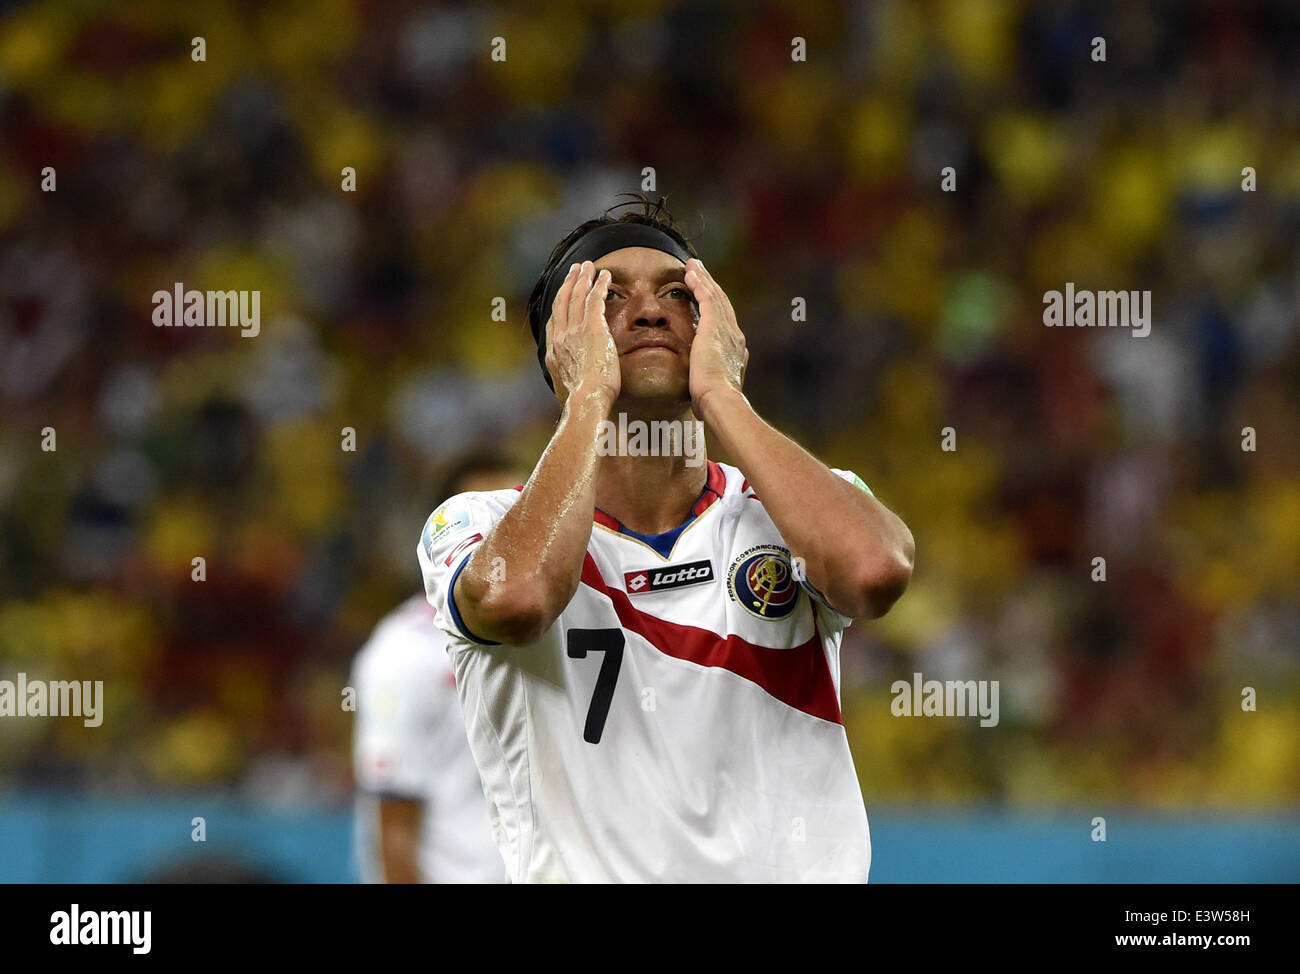 Recife, Brazil. 29th June, 2014. Costa Rica's Christian Bolanos reacts during a Round of 16 match between Costa Rica and Greece of 2014 FIFA World Cup at the Arena Pernambuco Stadium in Recife, Brazil, on June 29, 2014. Credit:  Lui Siu Wai/Xinhua/Alamy Live News Stock Photo